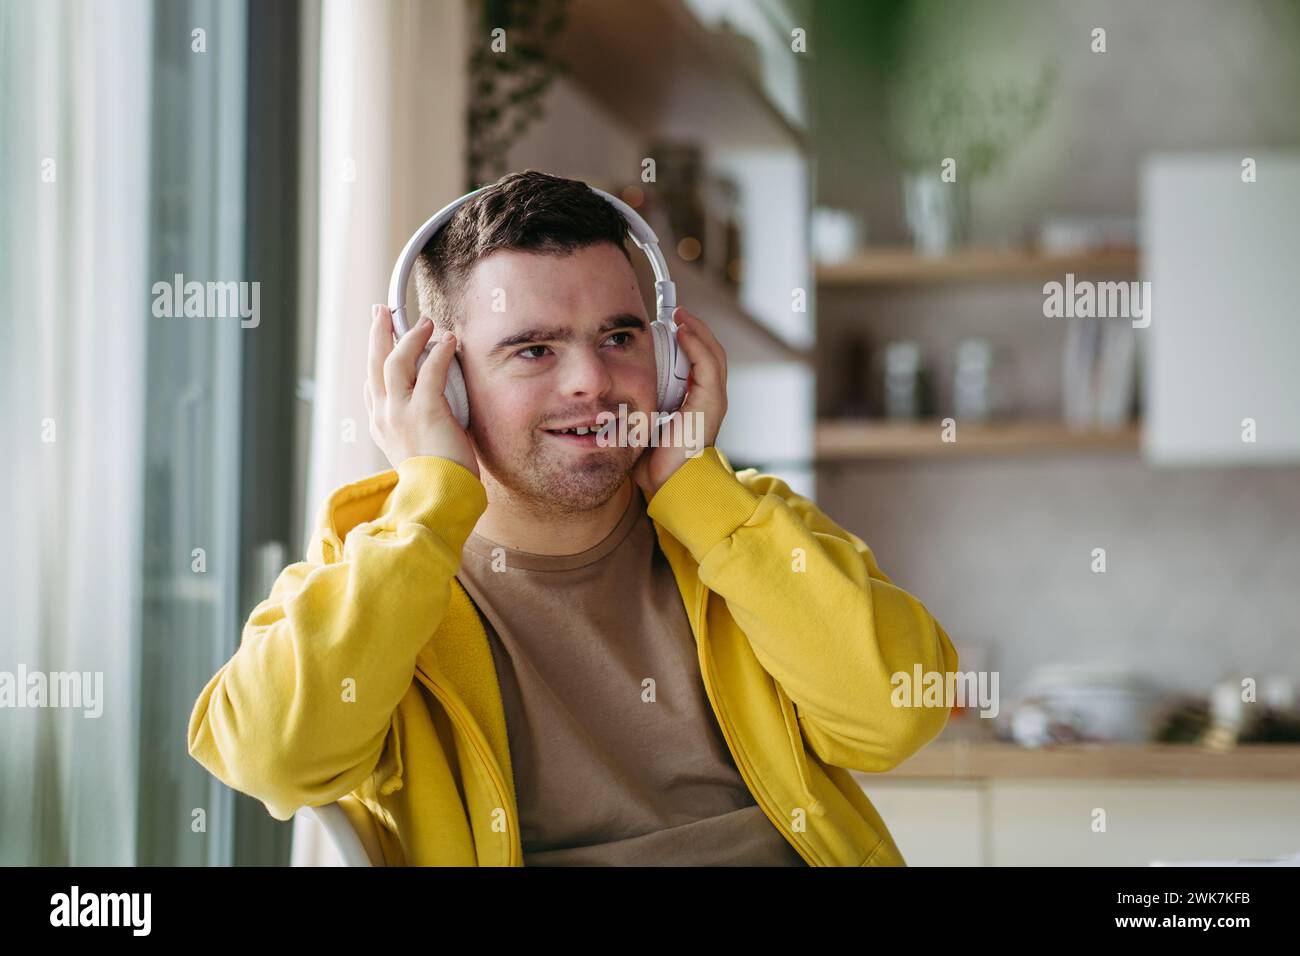 Young man with down syndrome listening his music via headphones. Sitting in the kitchen, wireless headphones on head. Stock Photo